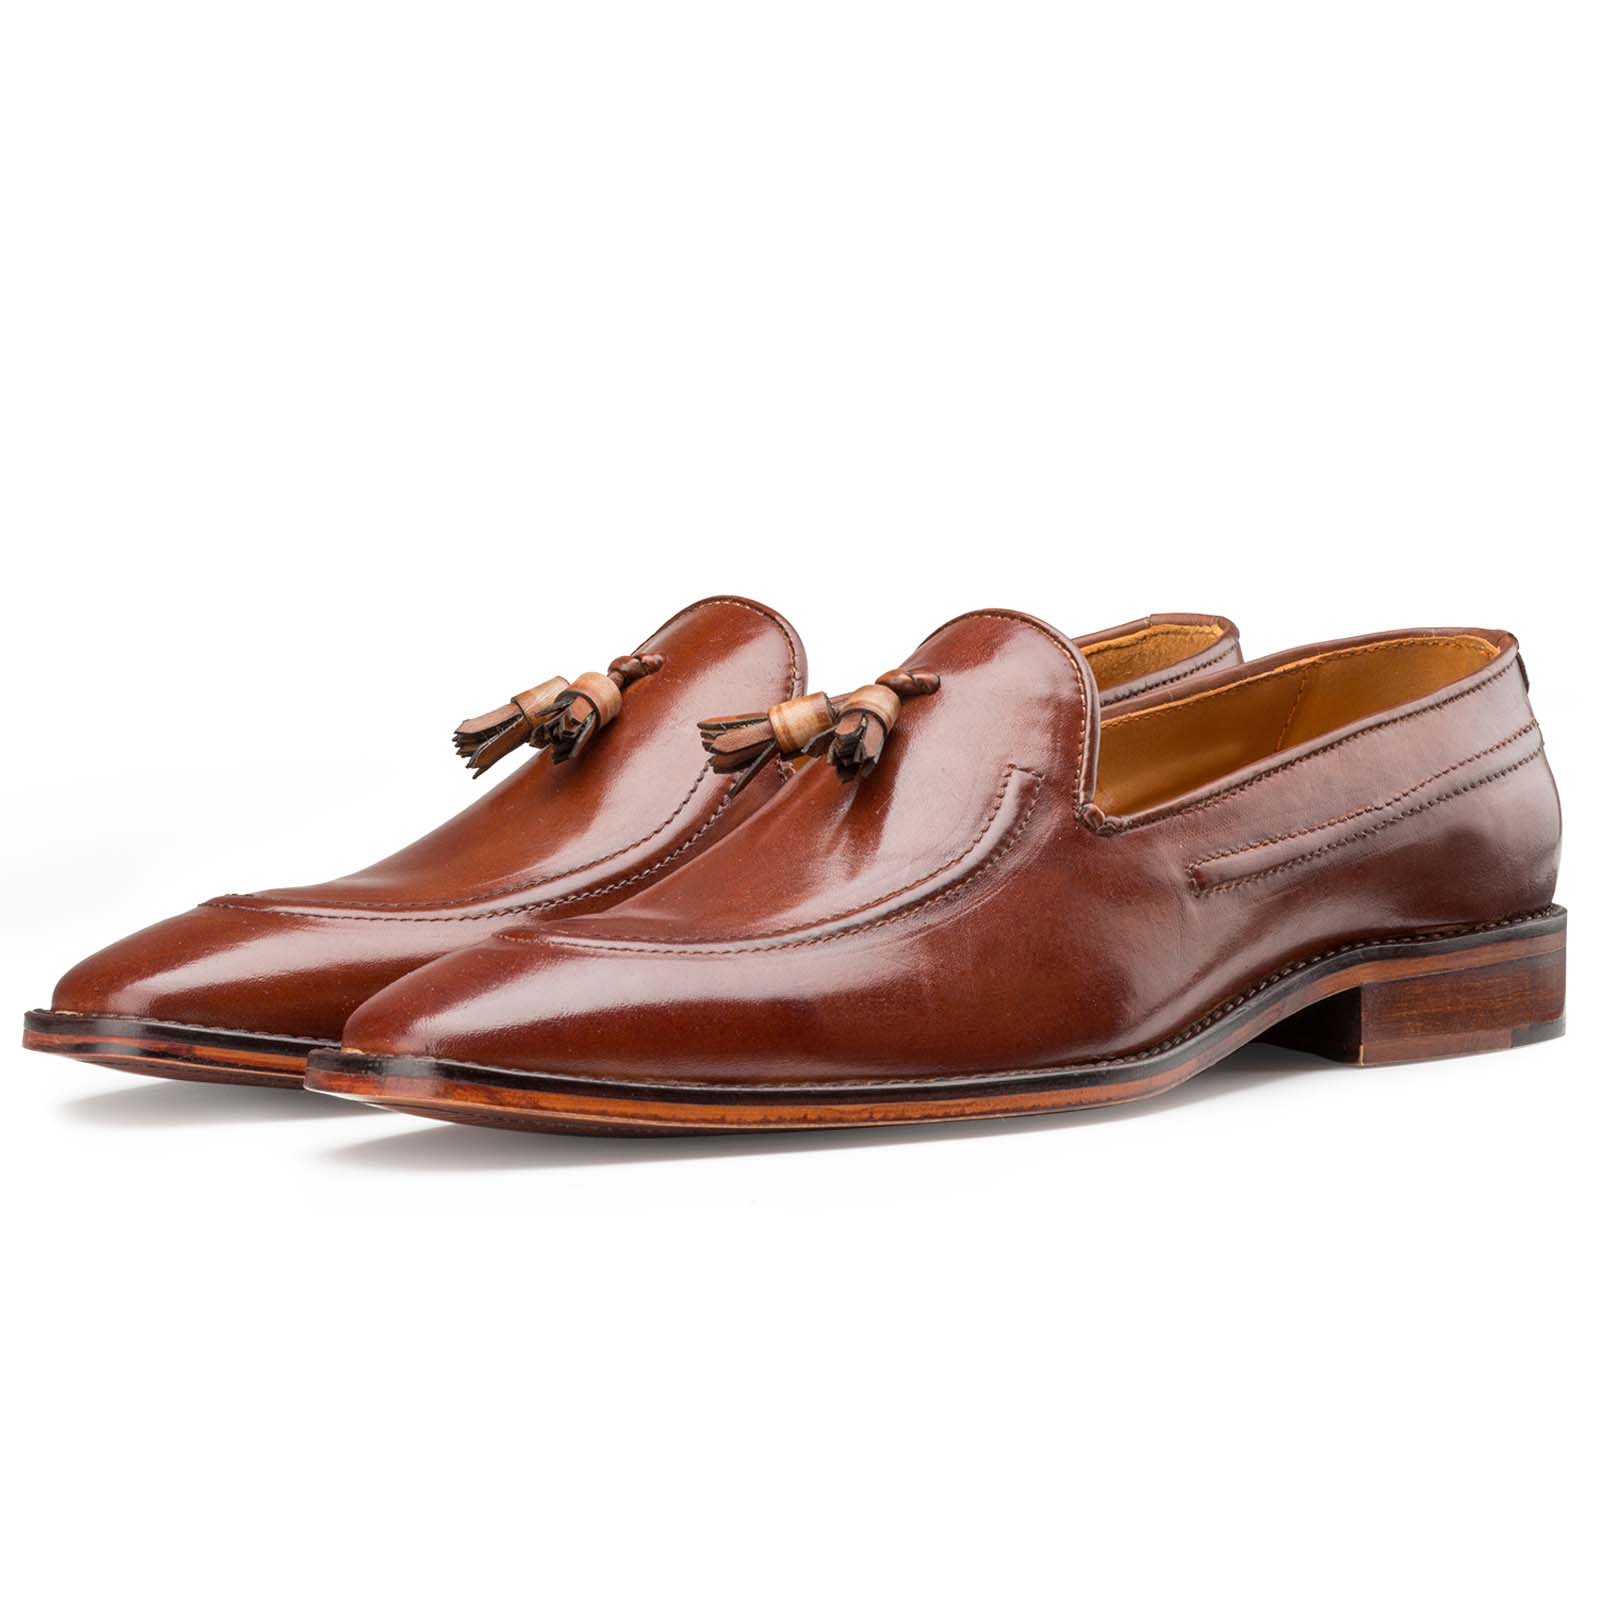 Escaro Royale' Brown Handcrafted Leather Tassel Loafers for Men in India.